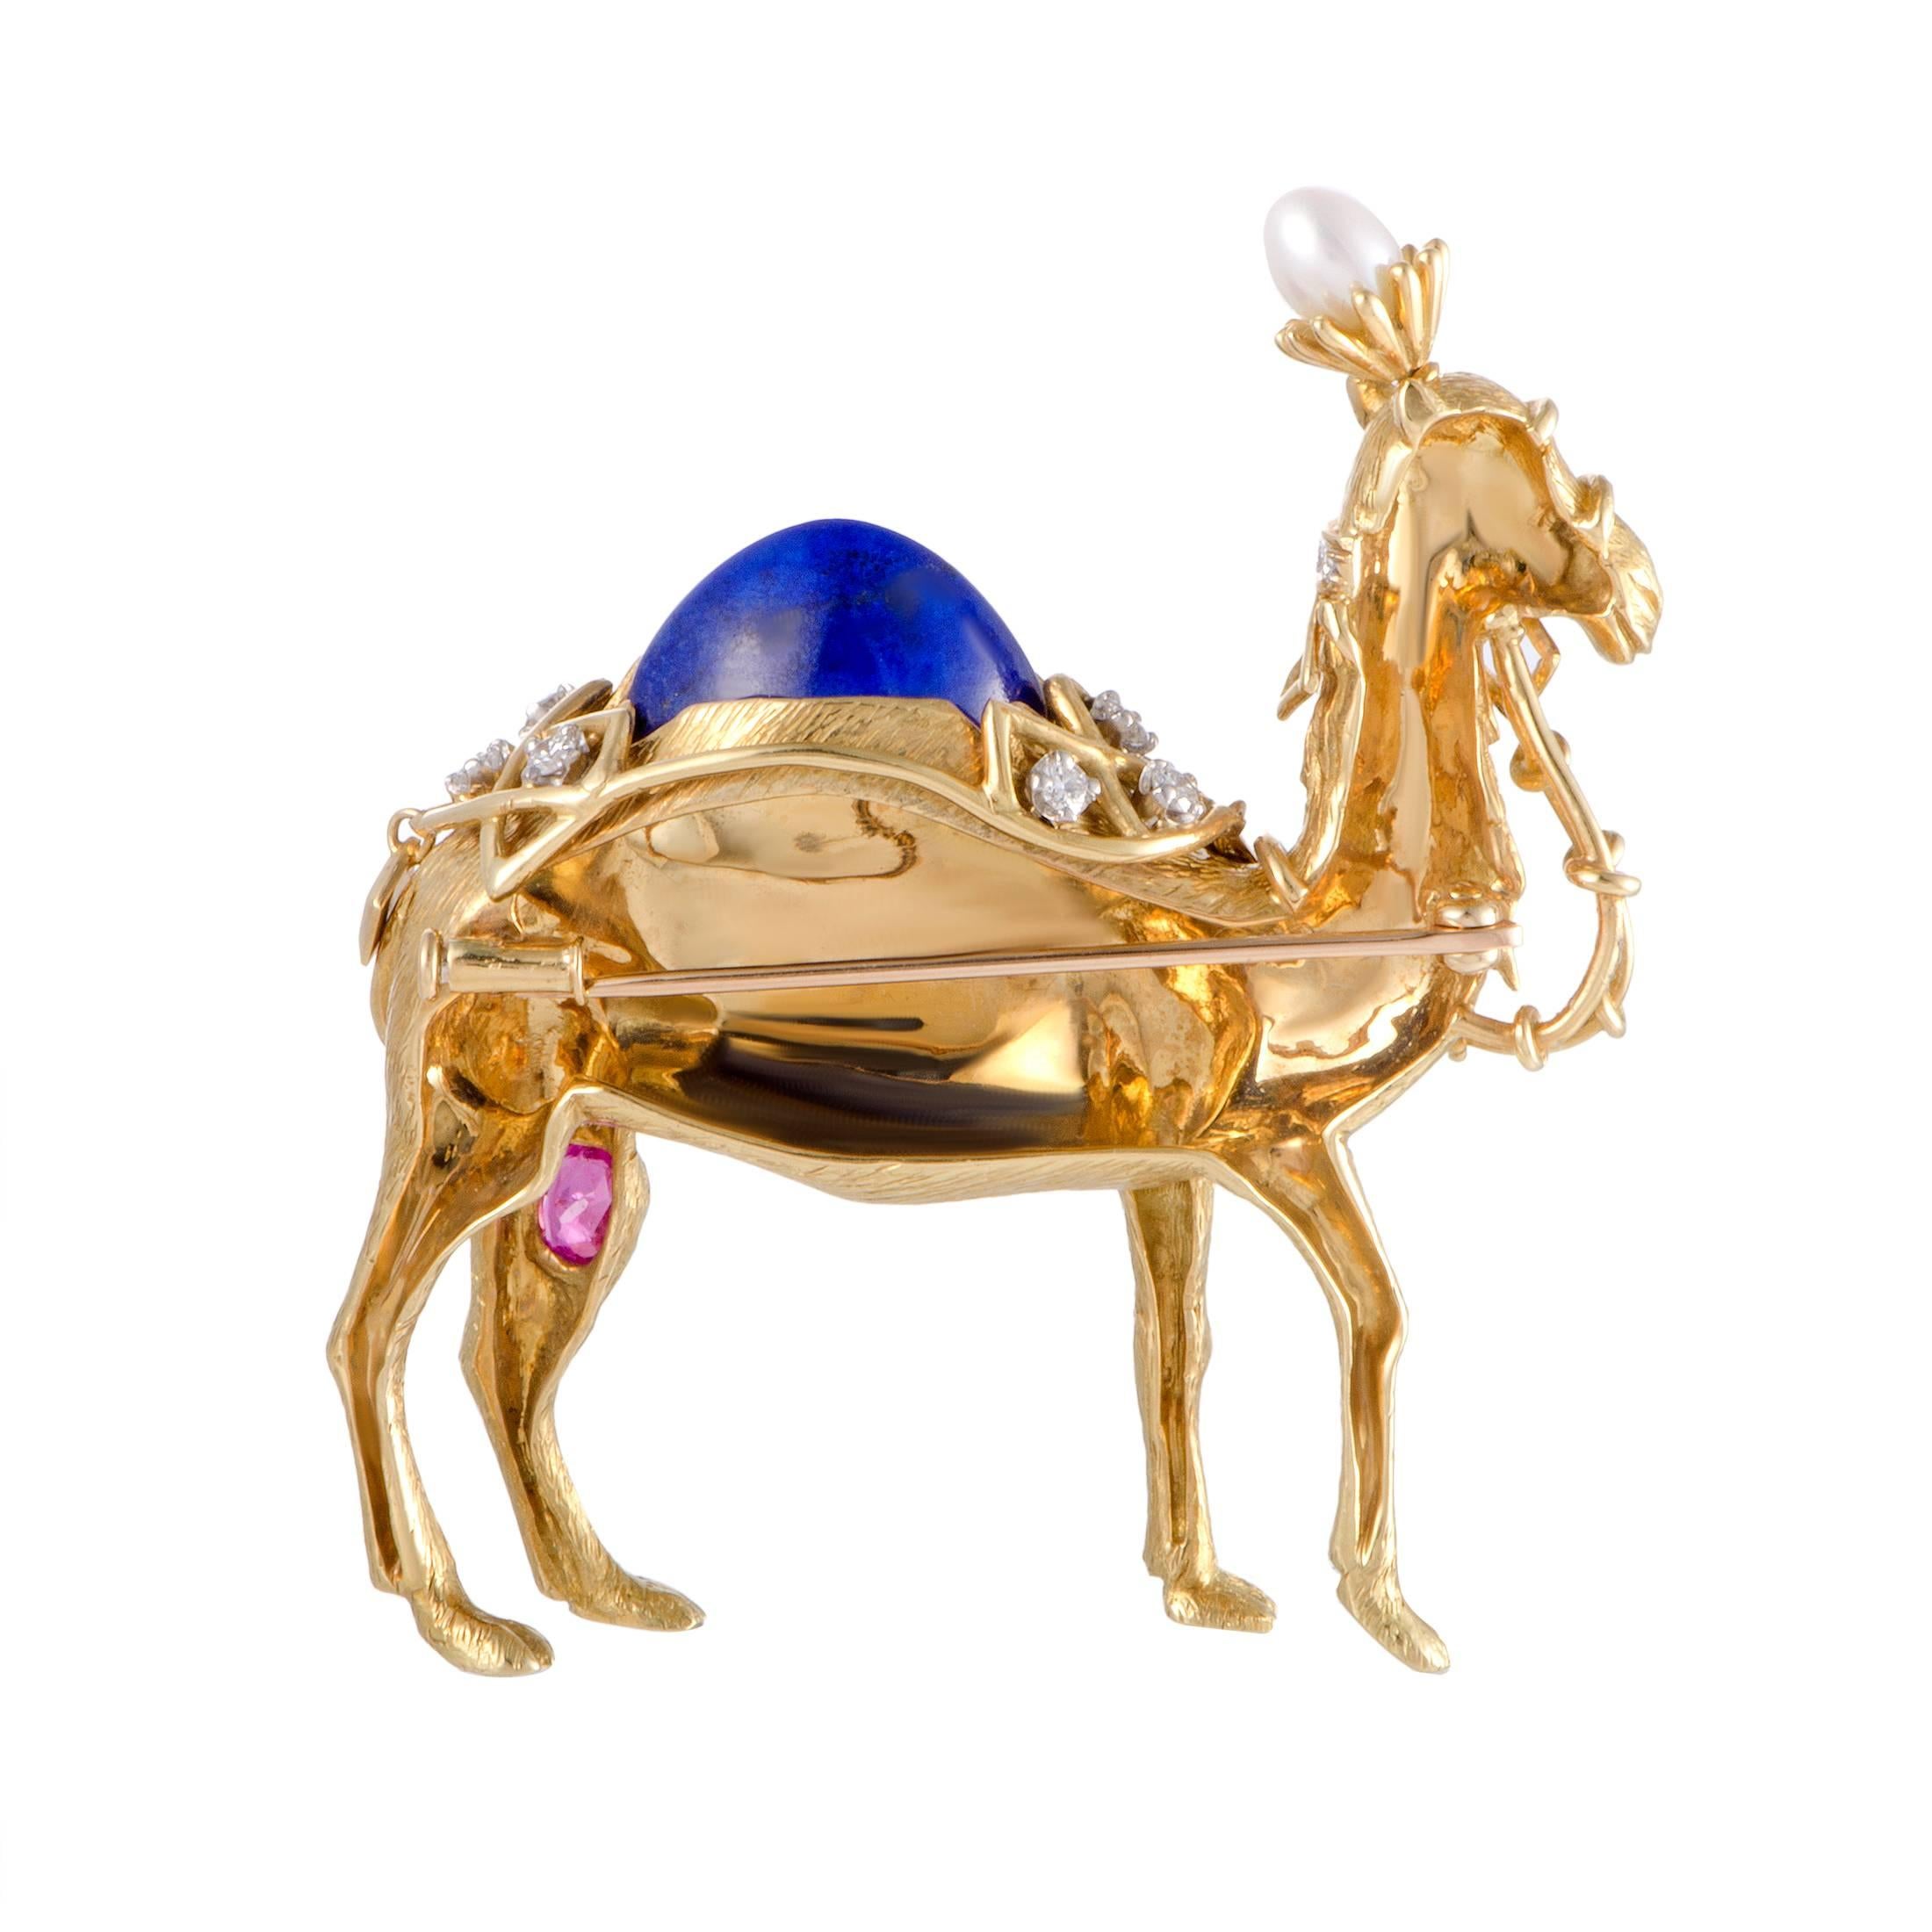 Designed by Jean Schlumberger for Tiffany & Co., this marvelous piece compels with its exquisite craftsmanship quality and lavish décor. The brooch depicts a camel and it is made of luxurious 18K yellow gold, embellished with lapis lazuli, ruby,